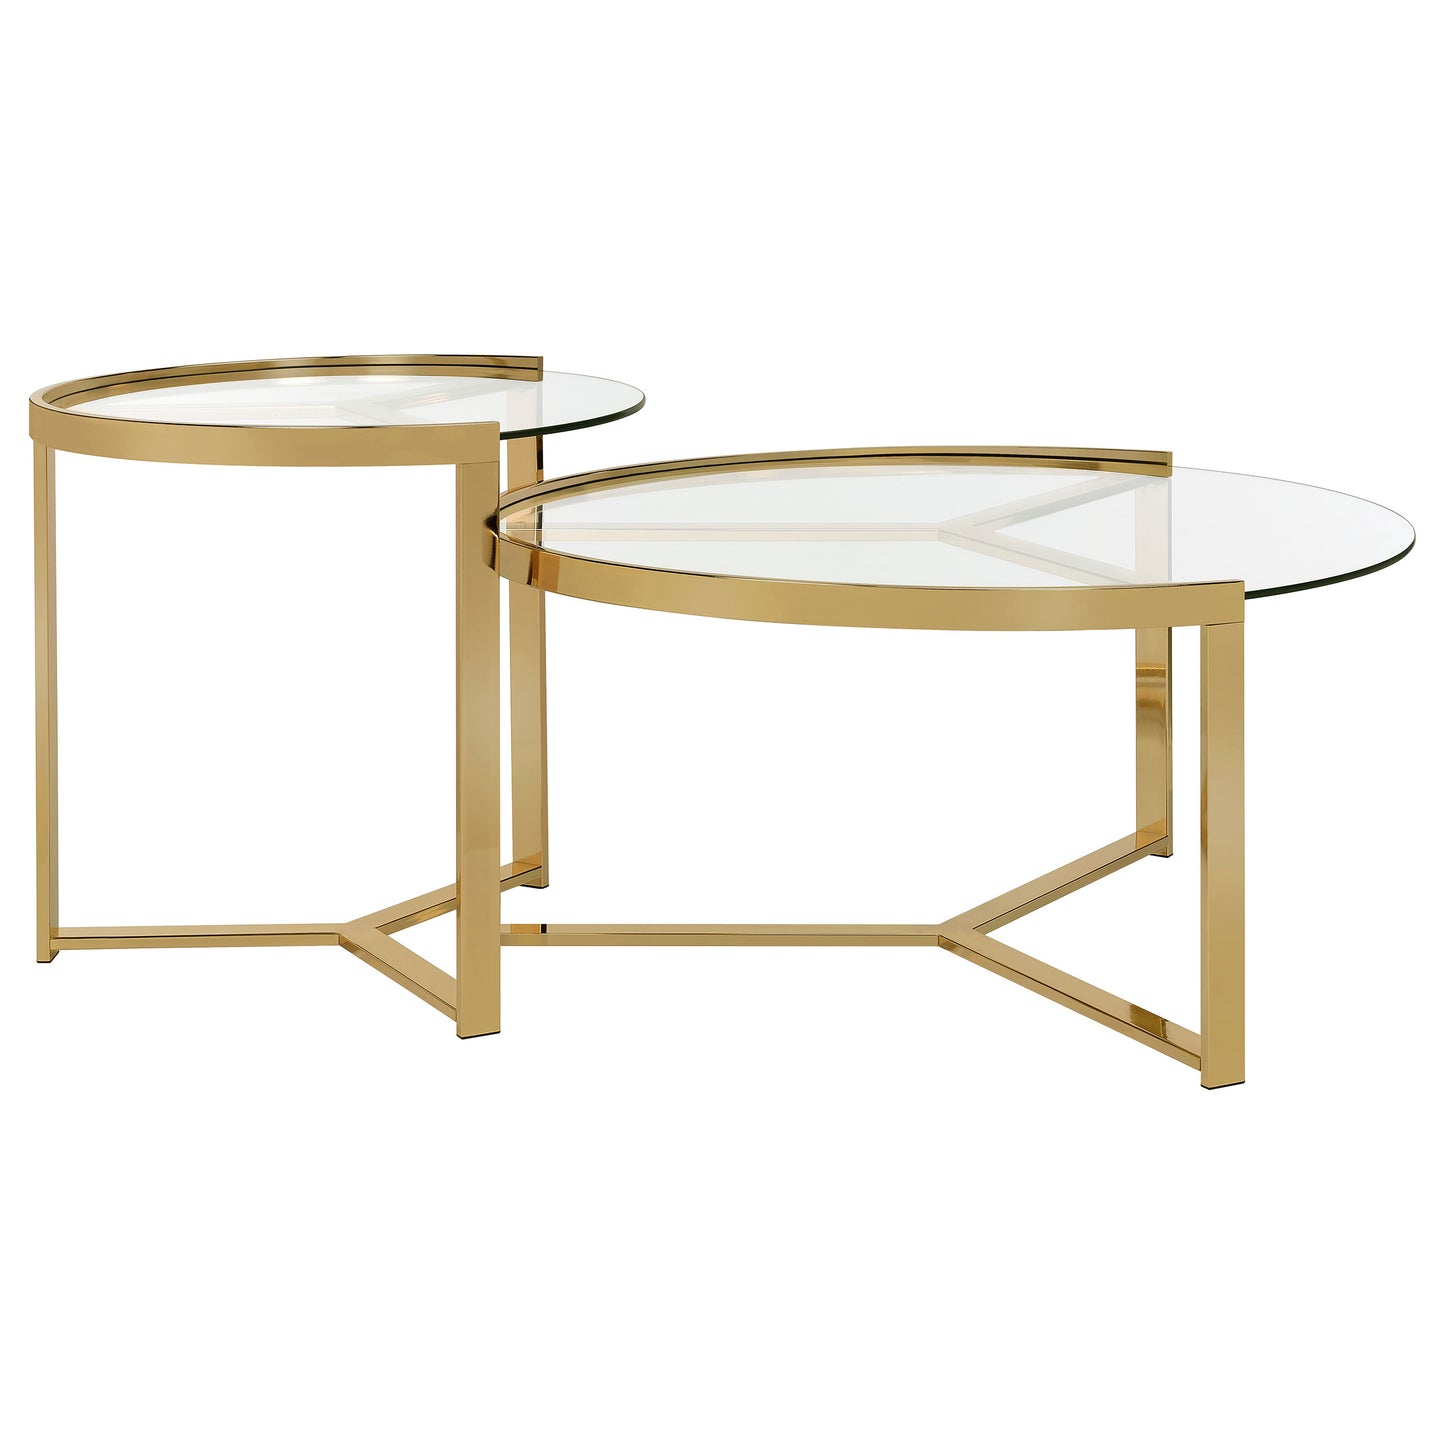 Delia 2-piece Round Nesting Table Clear and Gold